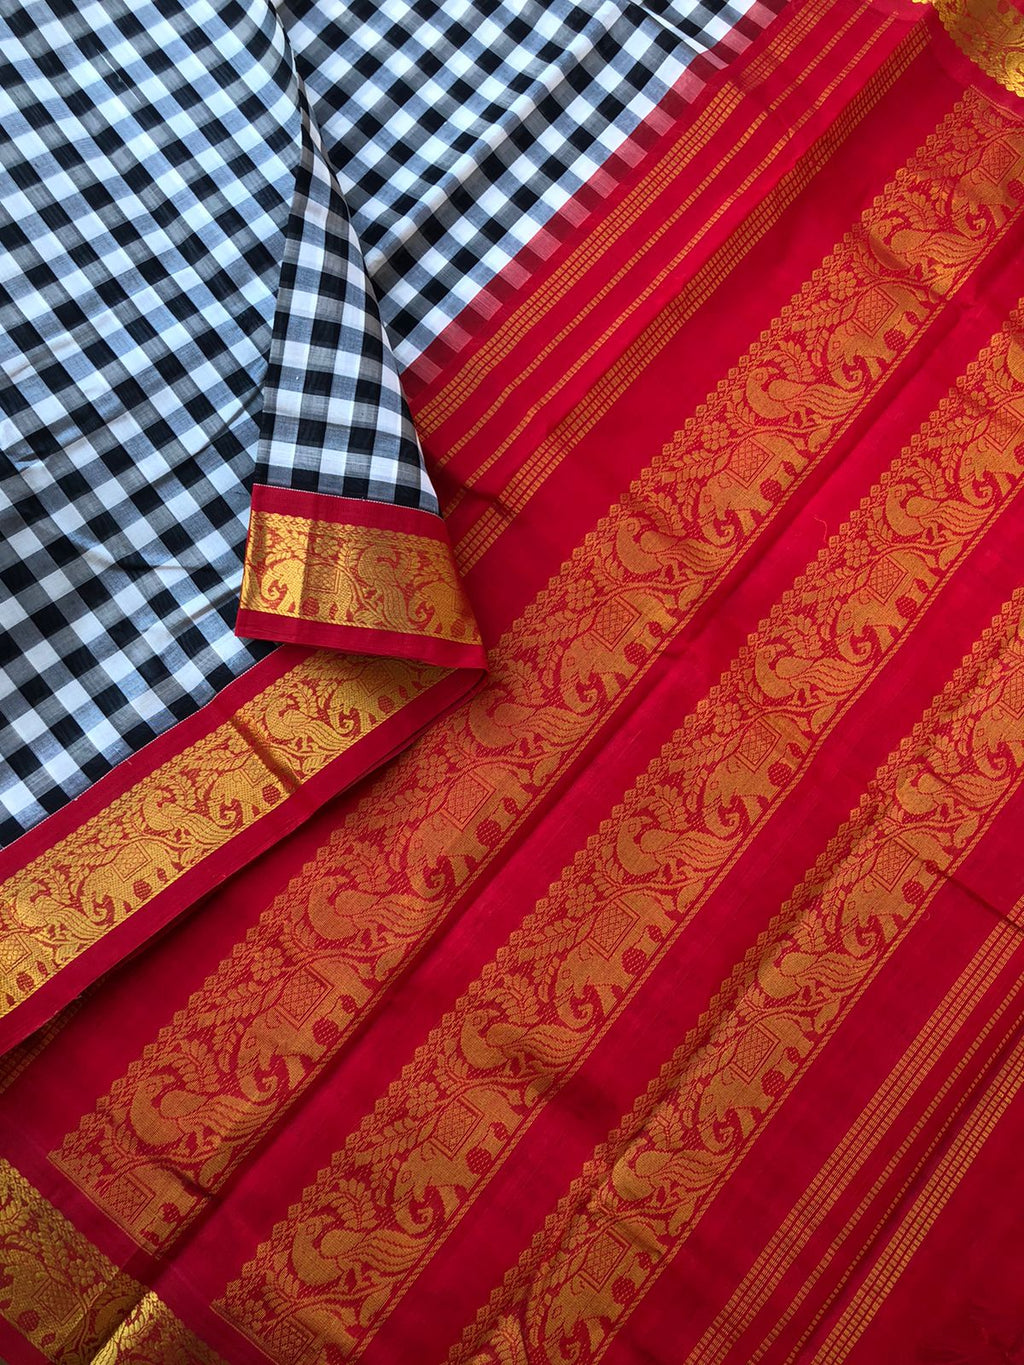 Kattams on Korvai Silk Cotton - black and white kattam with red borders pallu and blouse